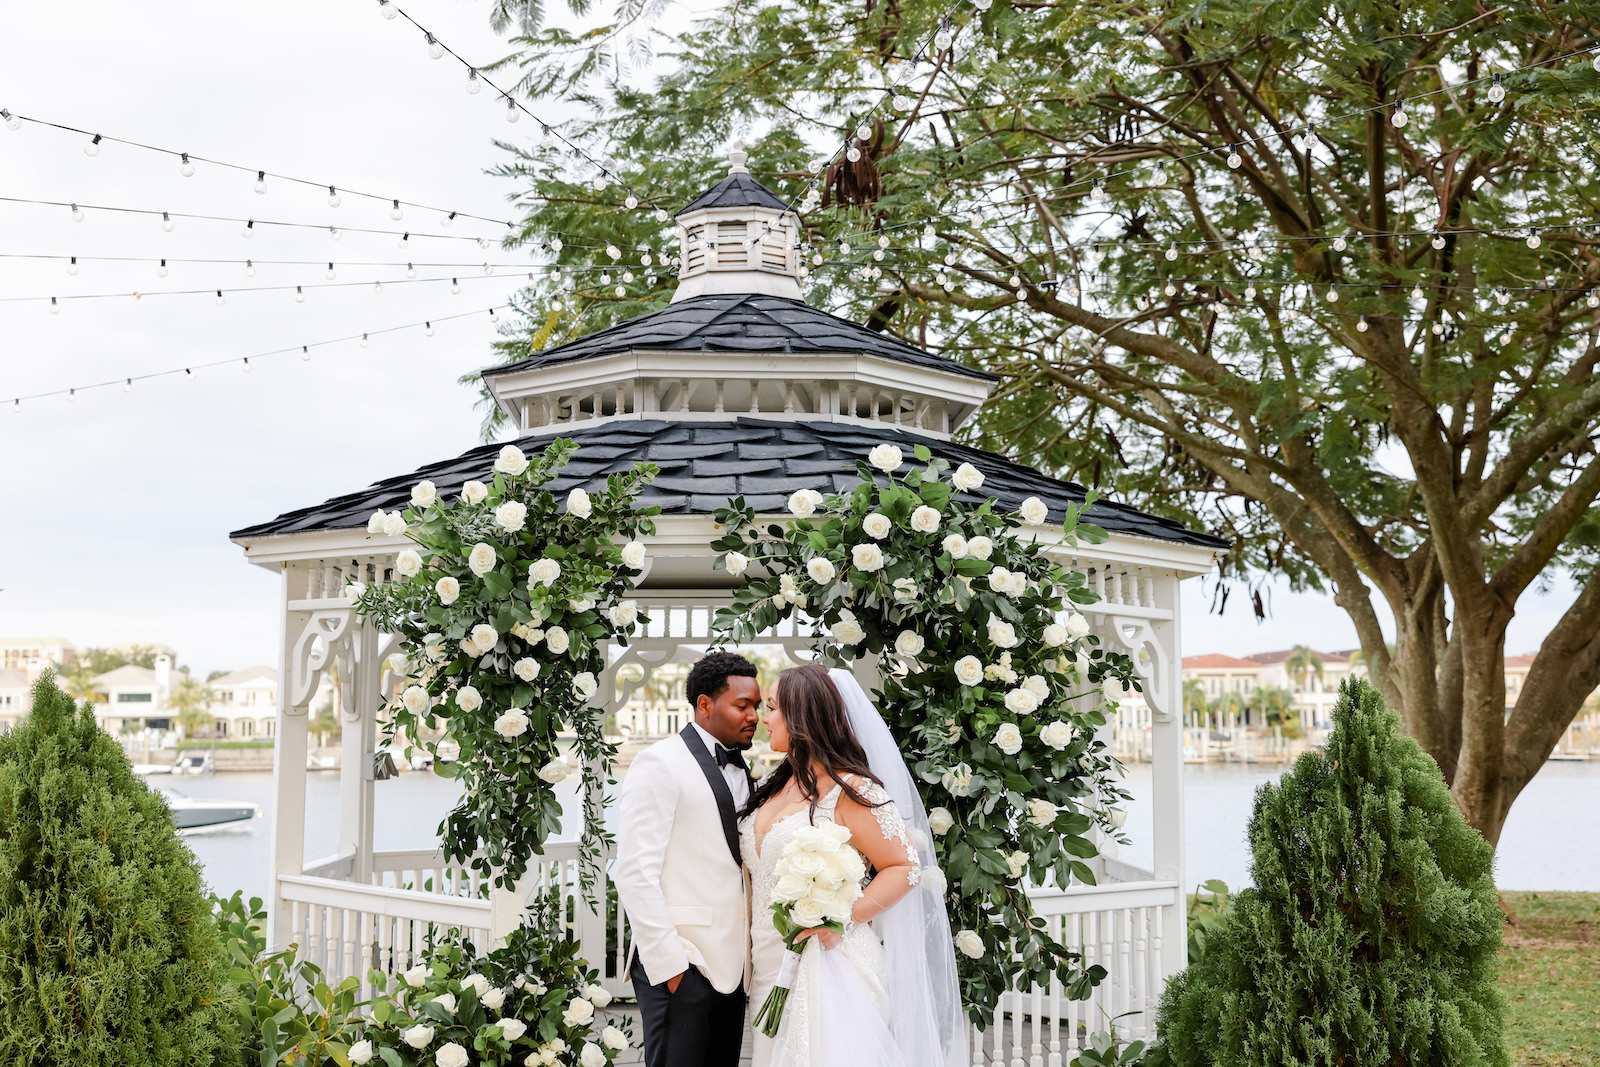 Modern Romantic Glam Bride and Groom Standing in Front of Waterfront Gazebo with Greenery and White Roses Arch | Tampa Bay Wedding Photographer Lifelong Photography Studio | Wedding Vennue Davis Islands Garden Club